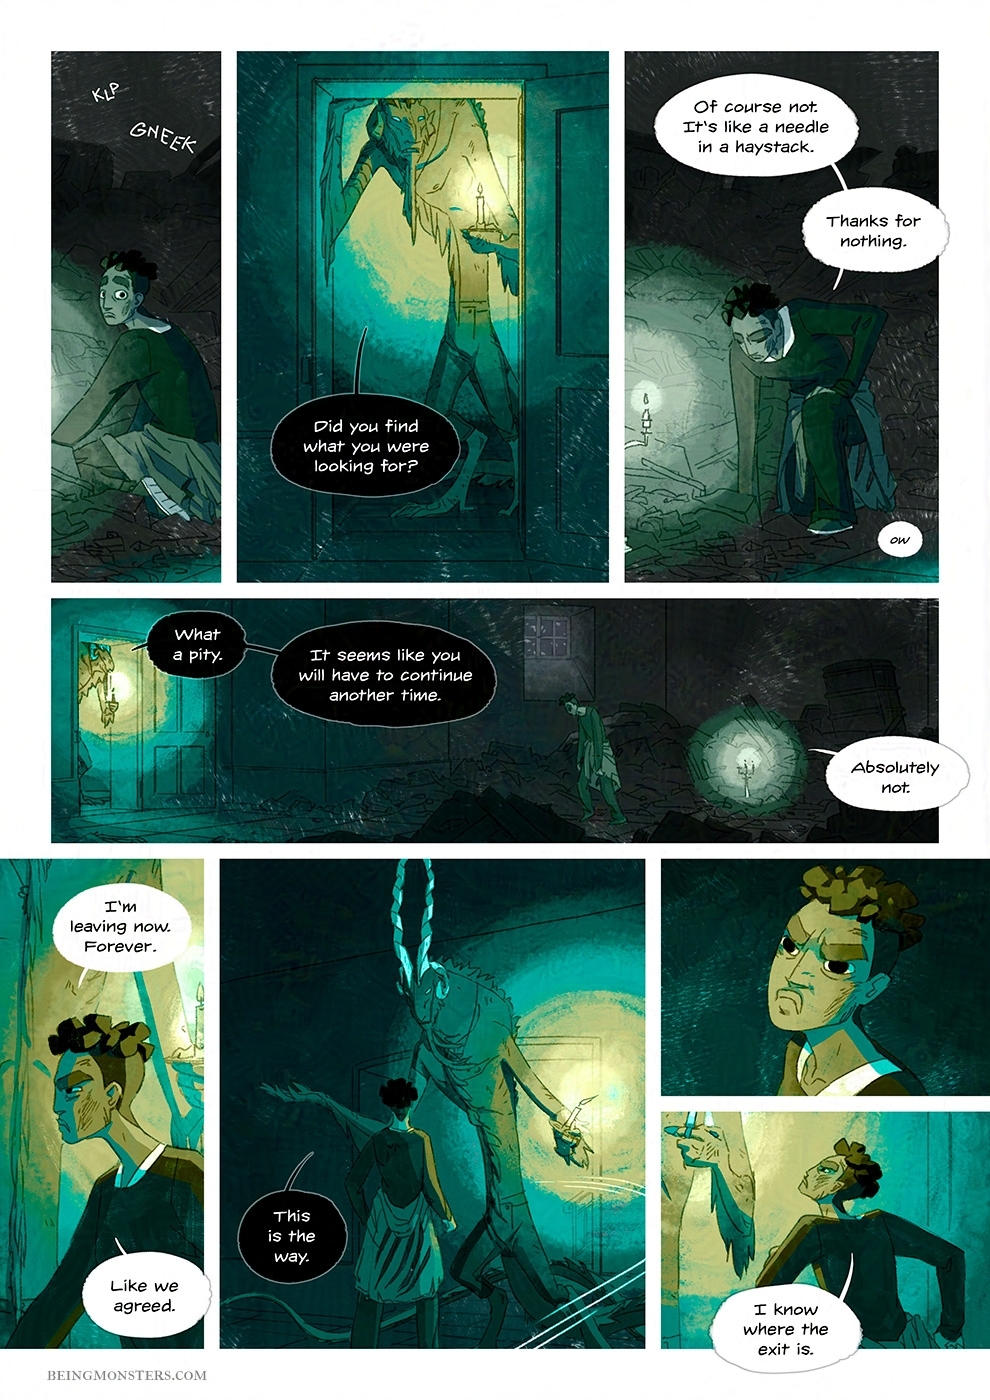 Being Monsters Book 2 Chapter 7 Page 10 EN